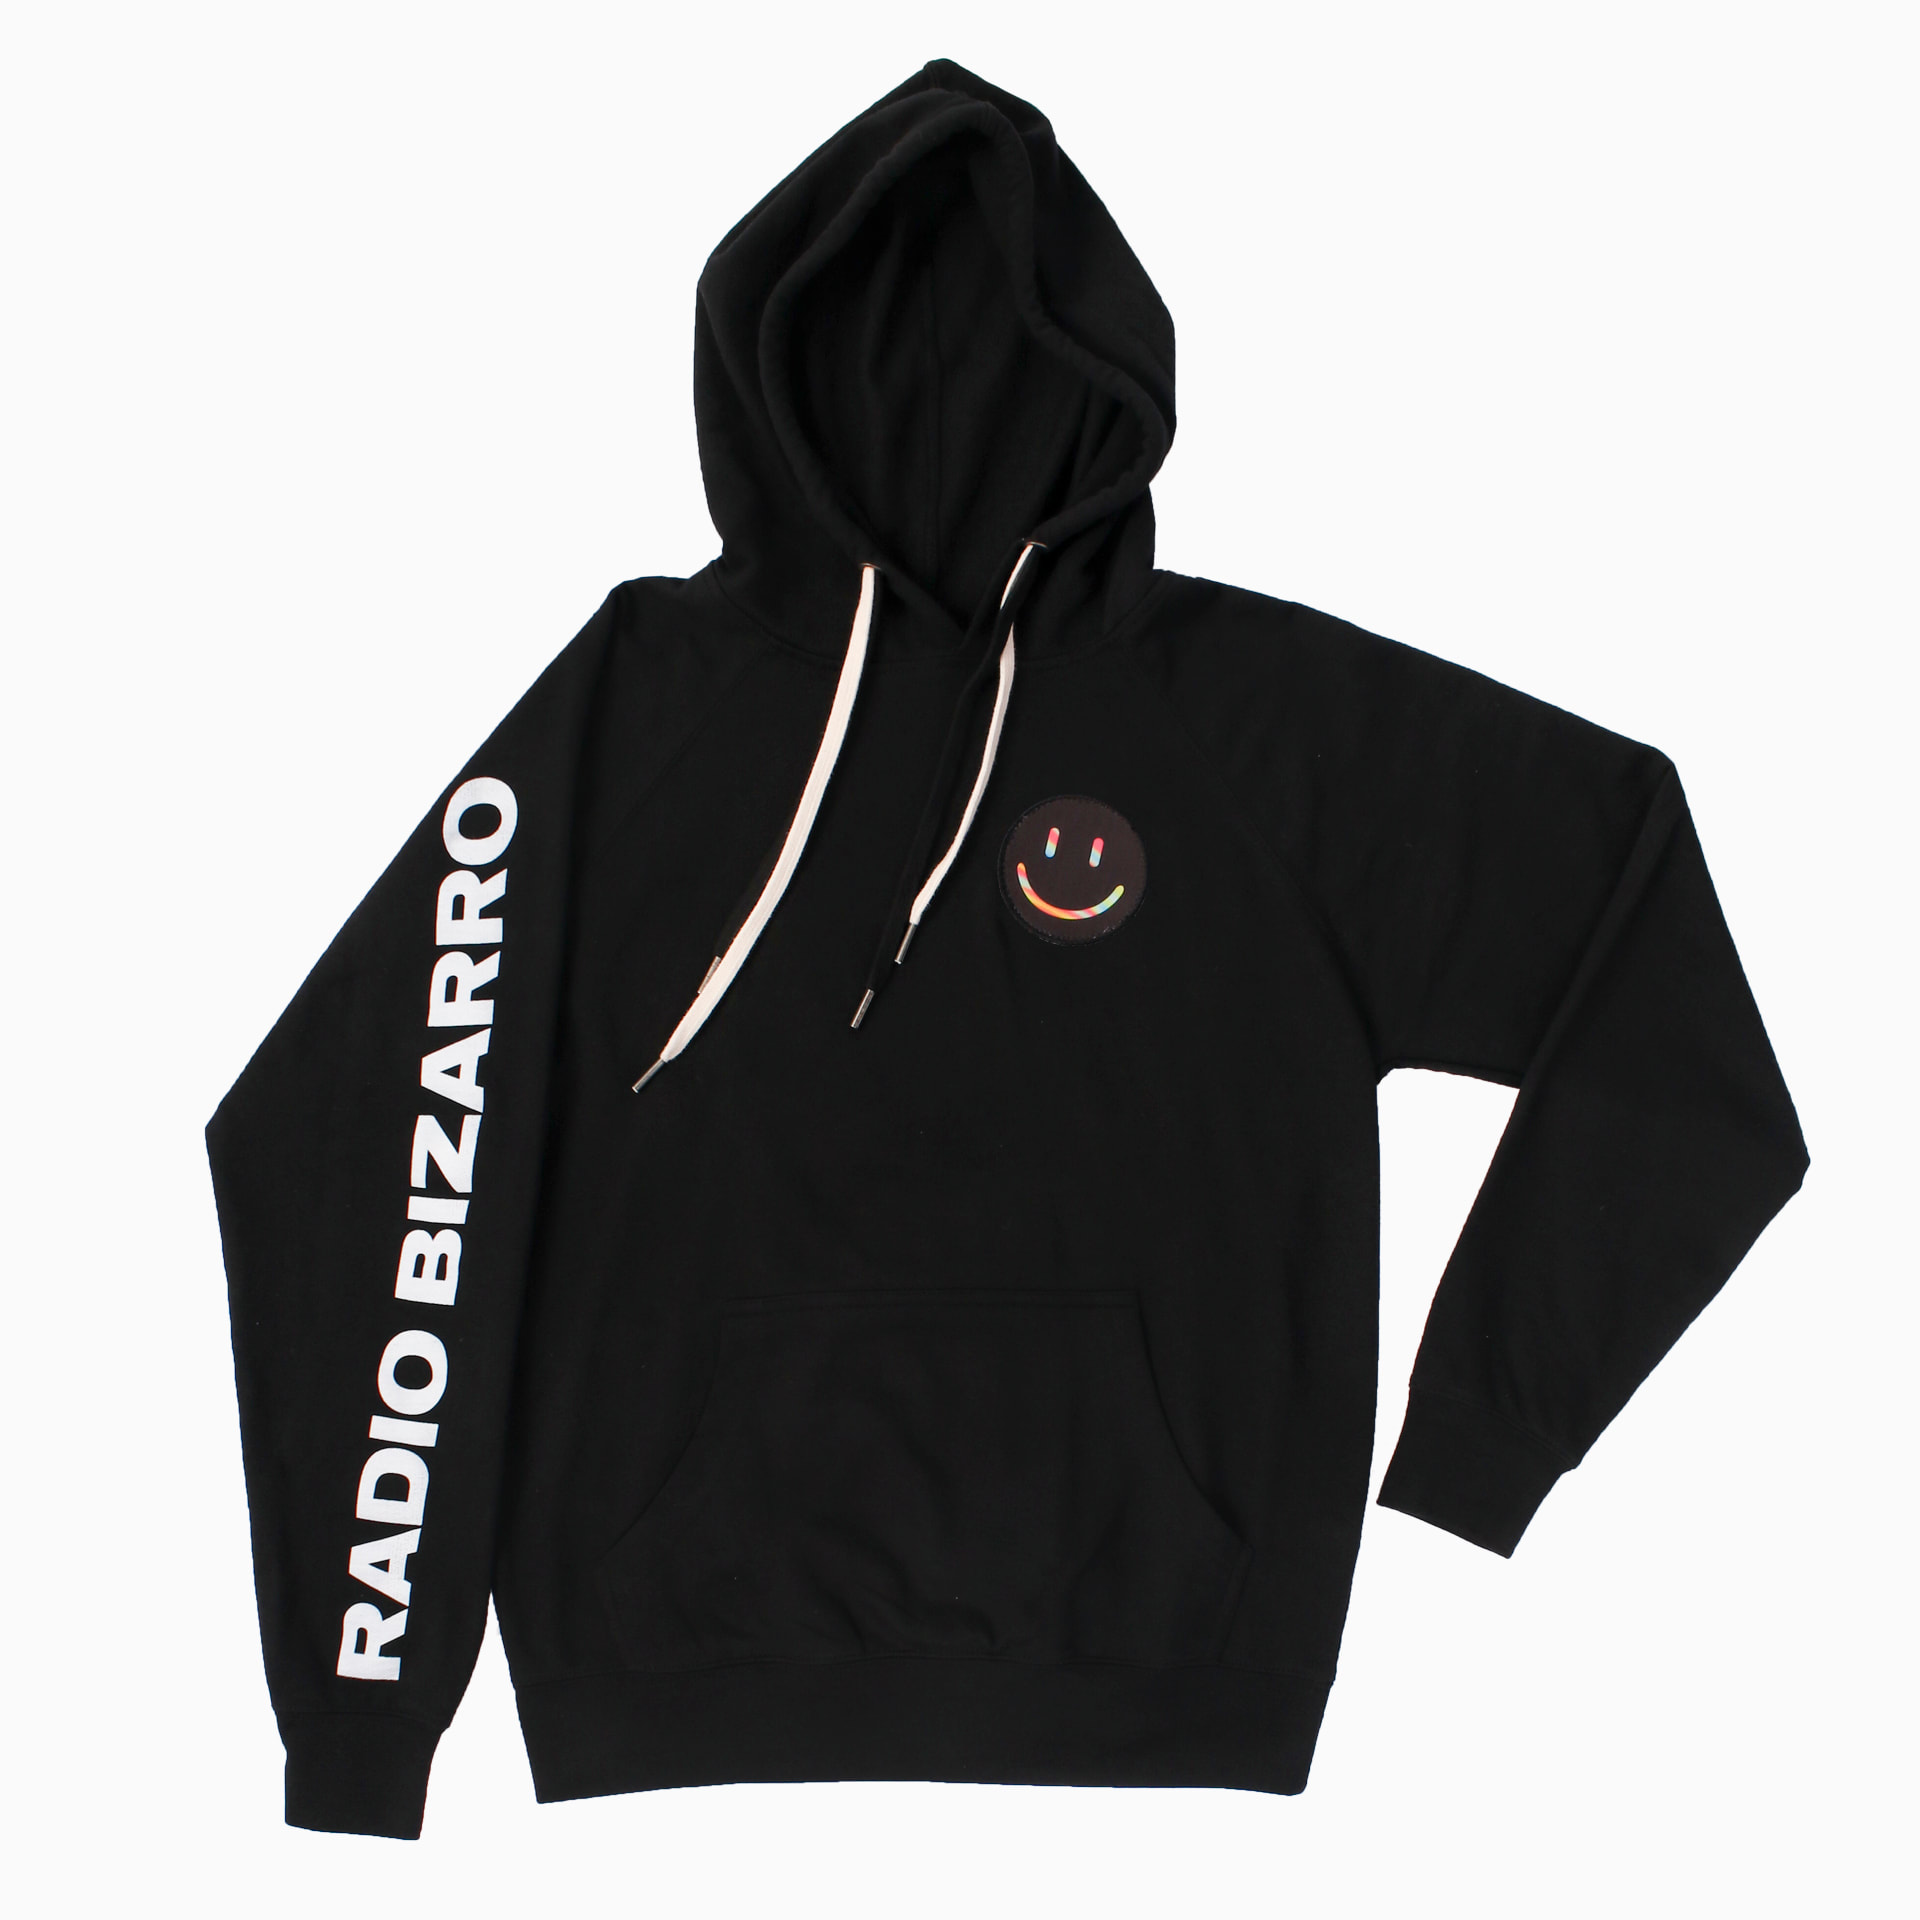 Limited Edition Black Hoodie with Patch